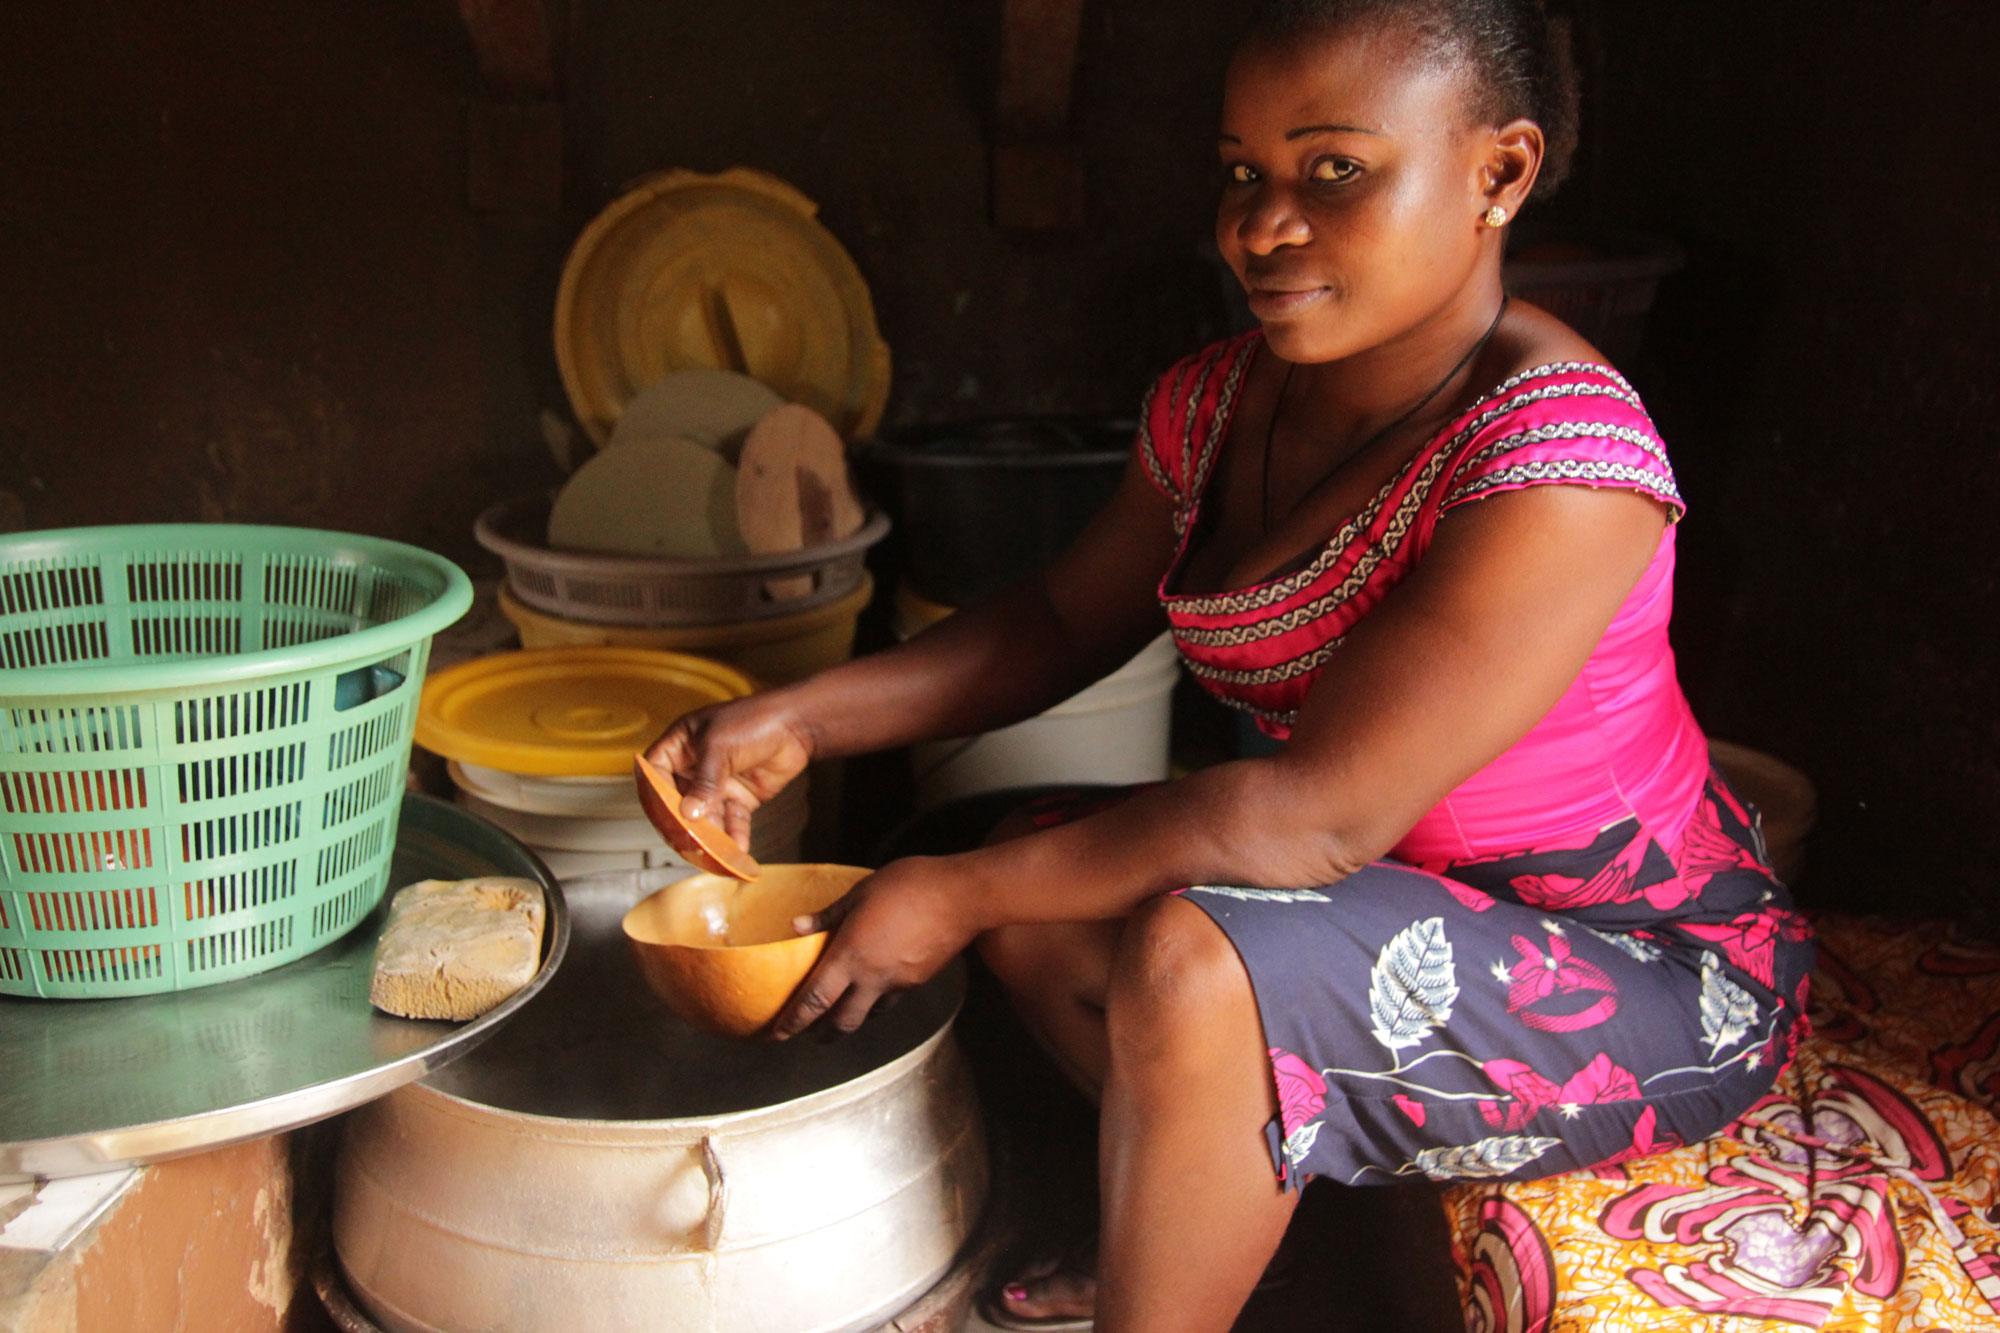 Photograph of a woman in Benin ladeling a traditional beer from a large kettle into a smaller bowl. The woman is seated and looking toward the camera.